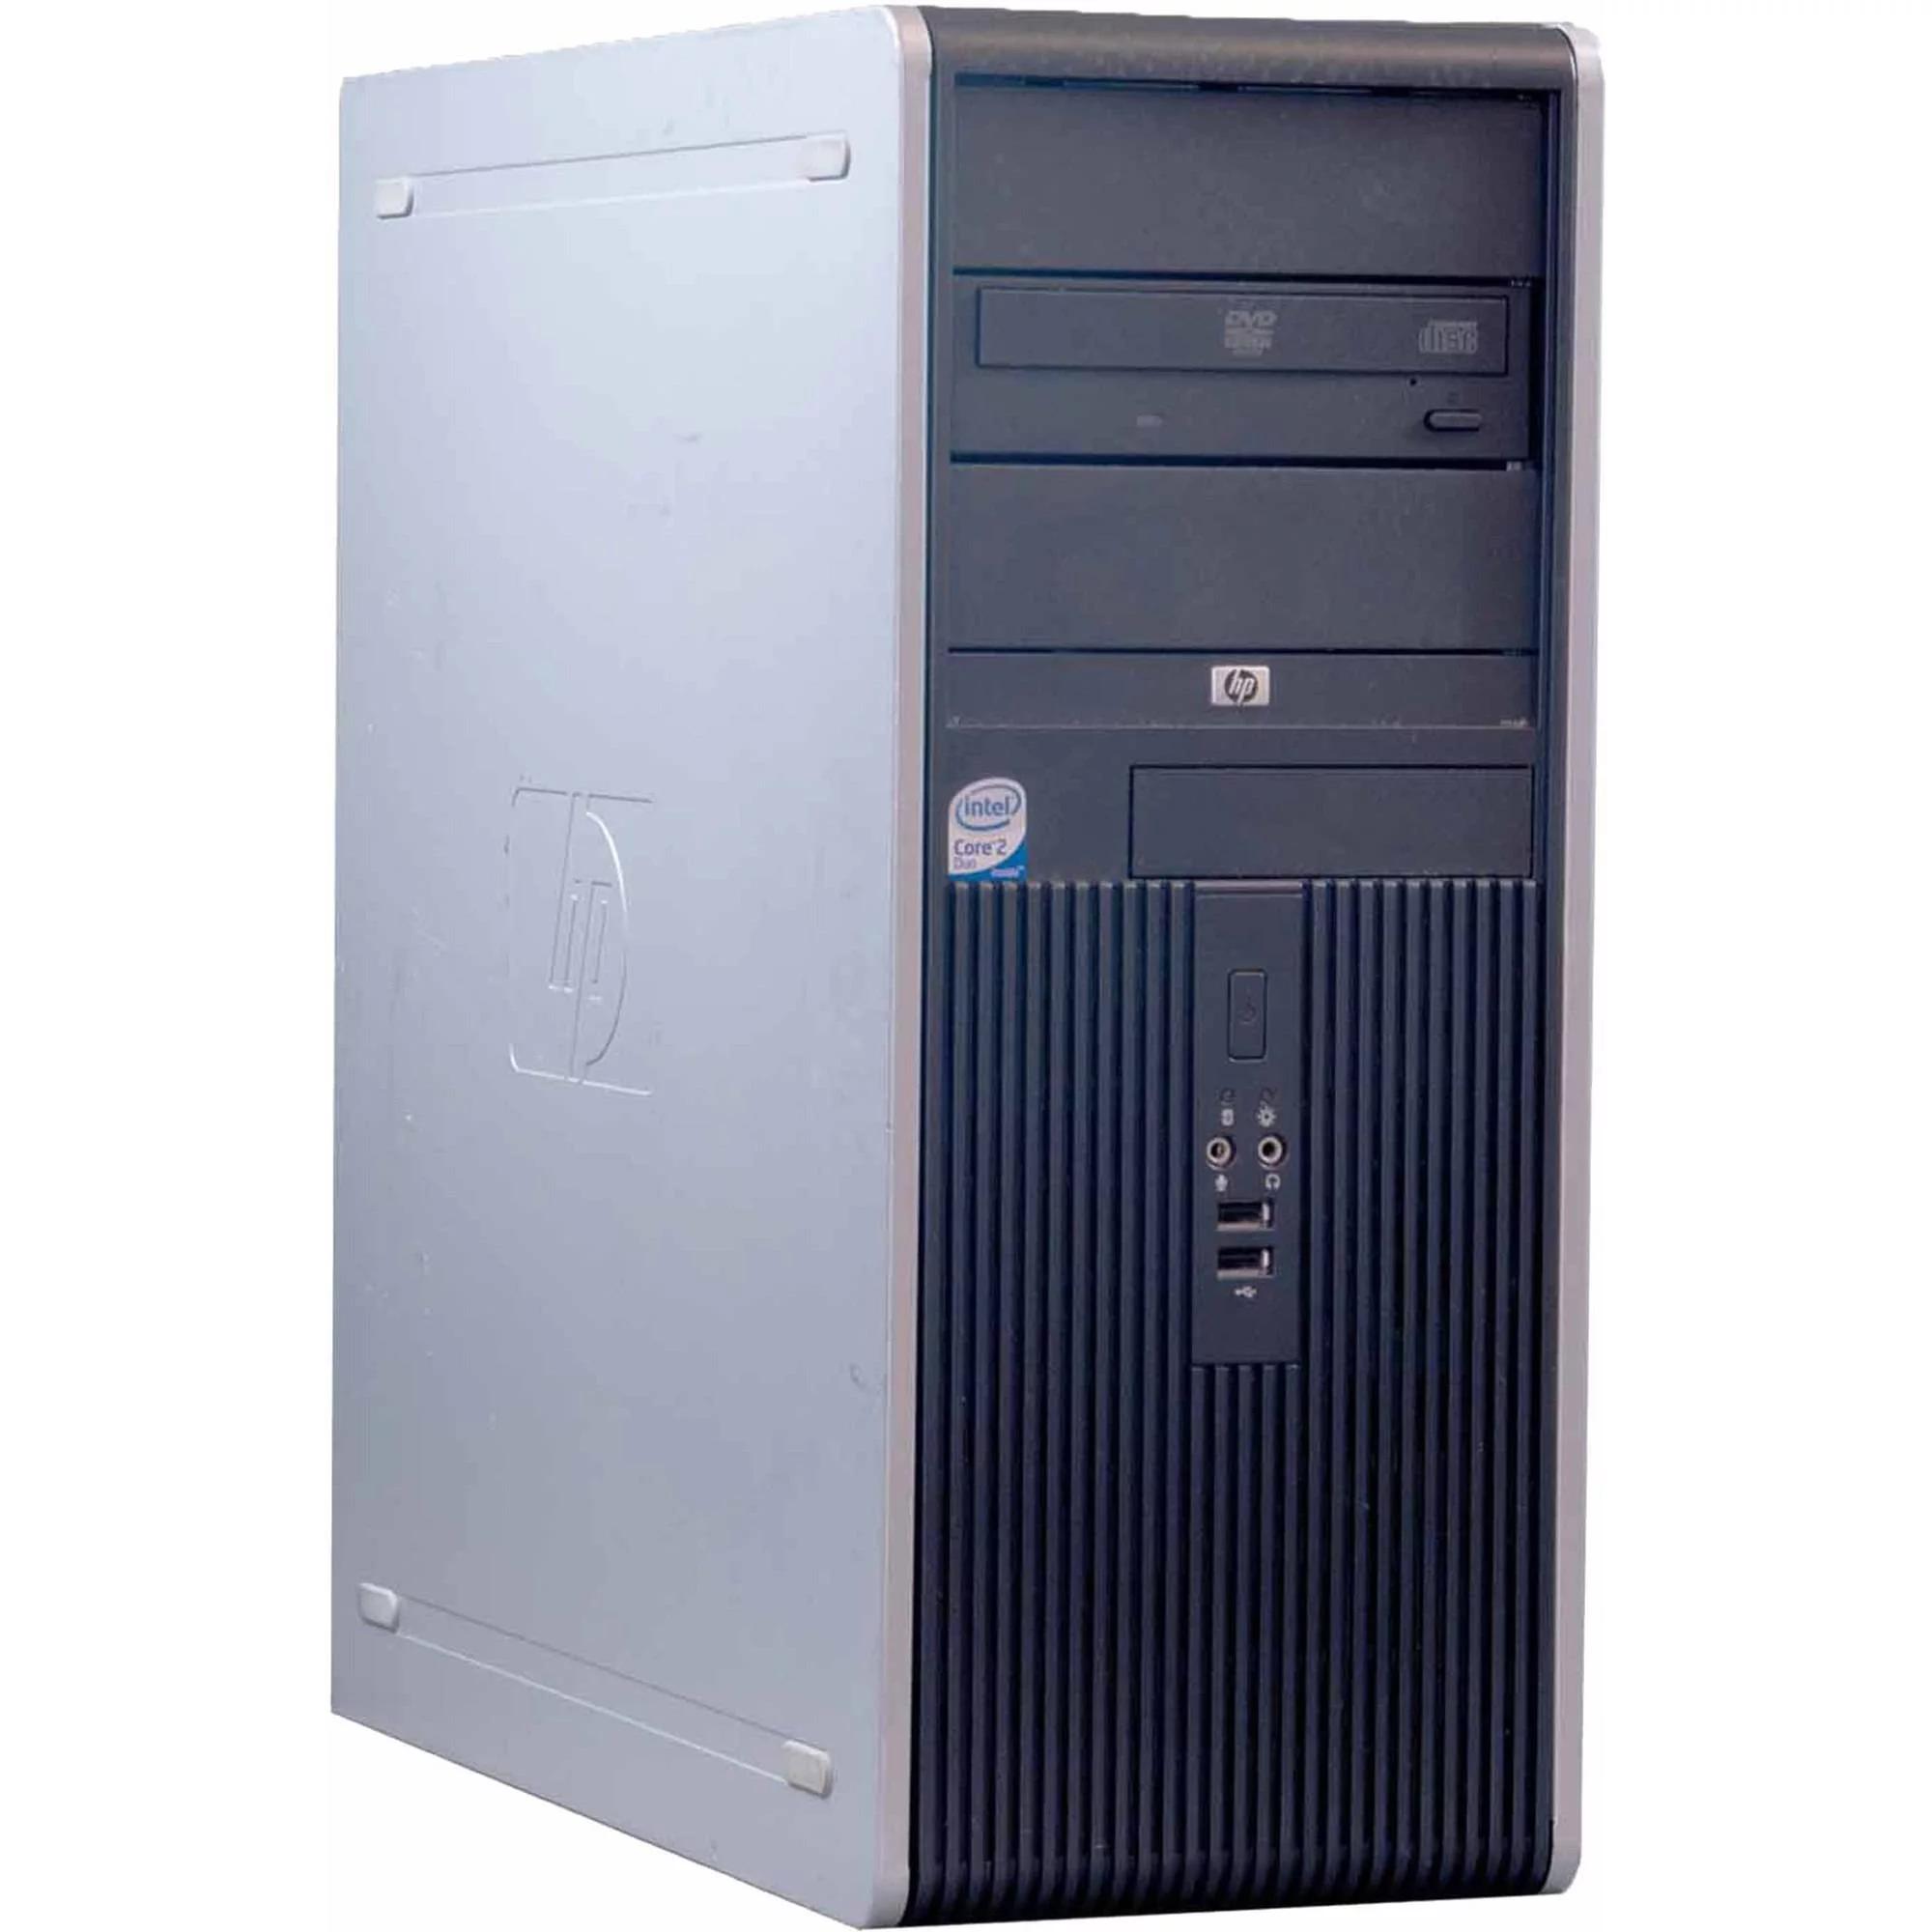 hewlett packard compaq dc7900 - What ports are on the HP Compaq dc7900